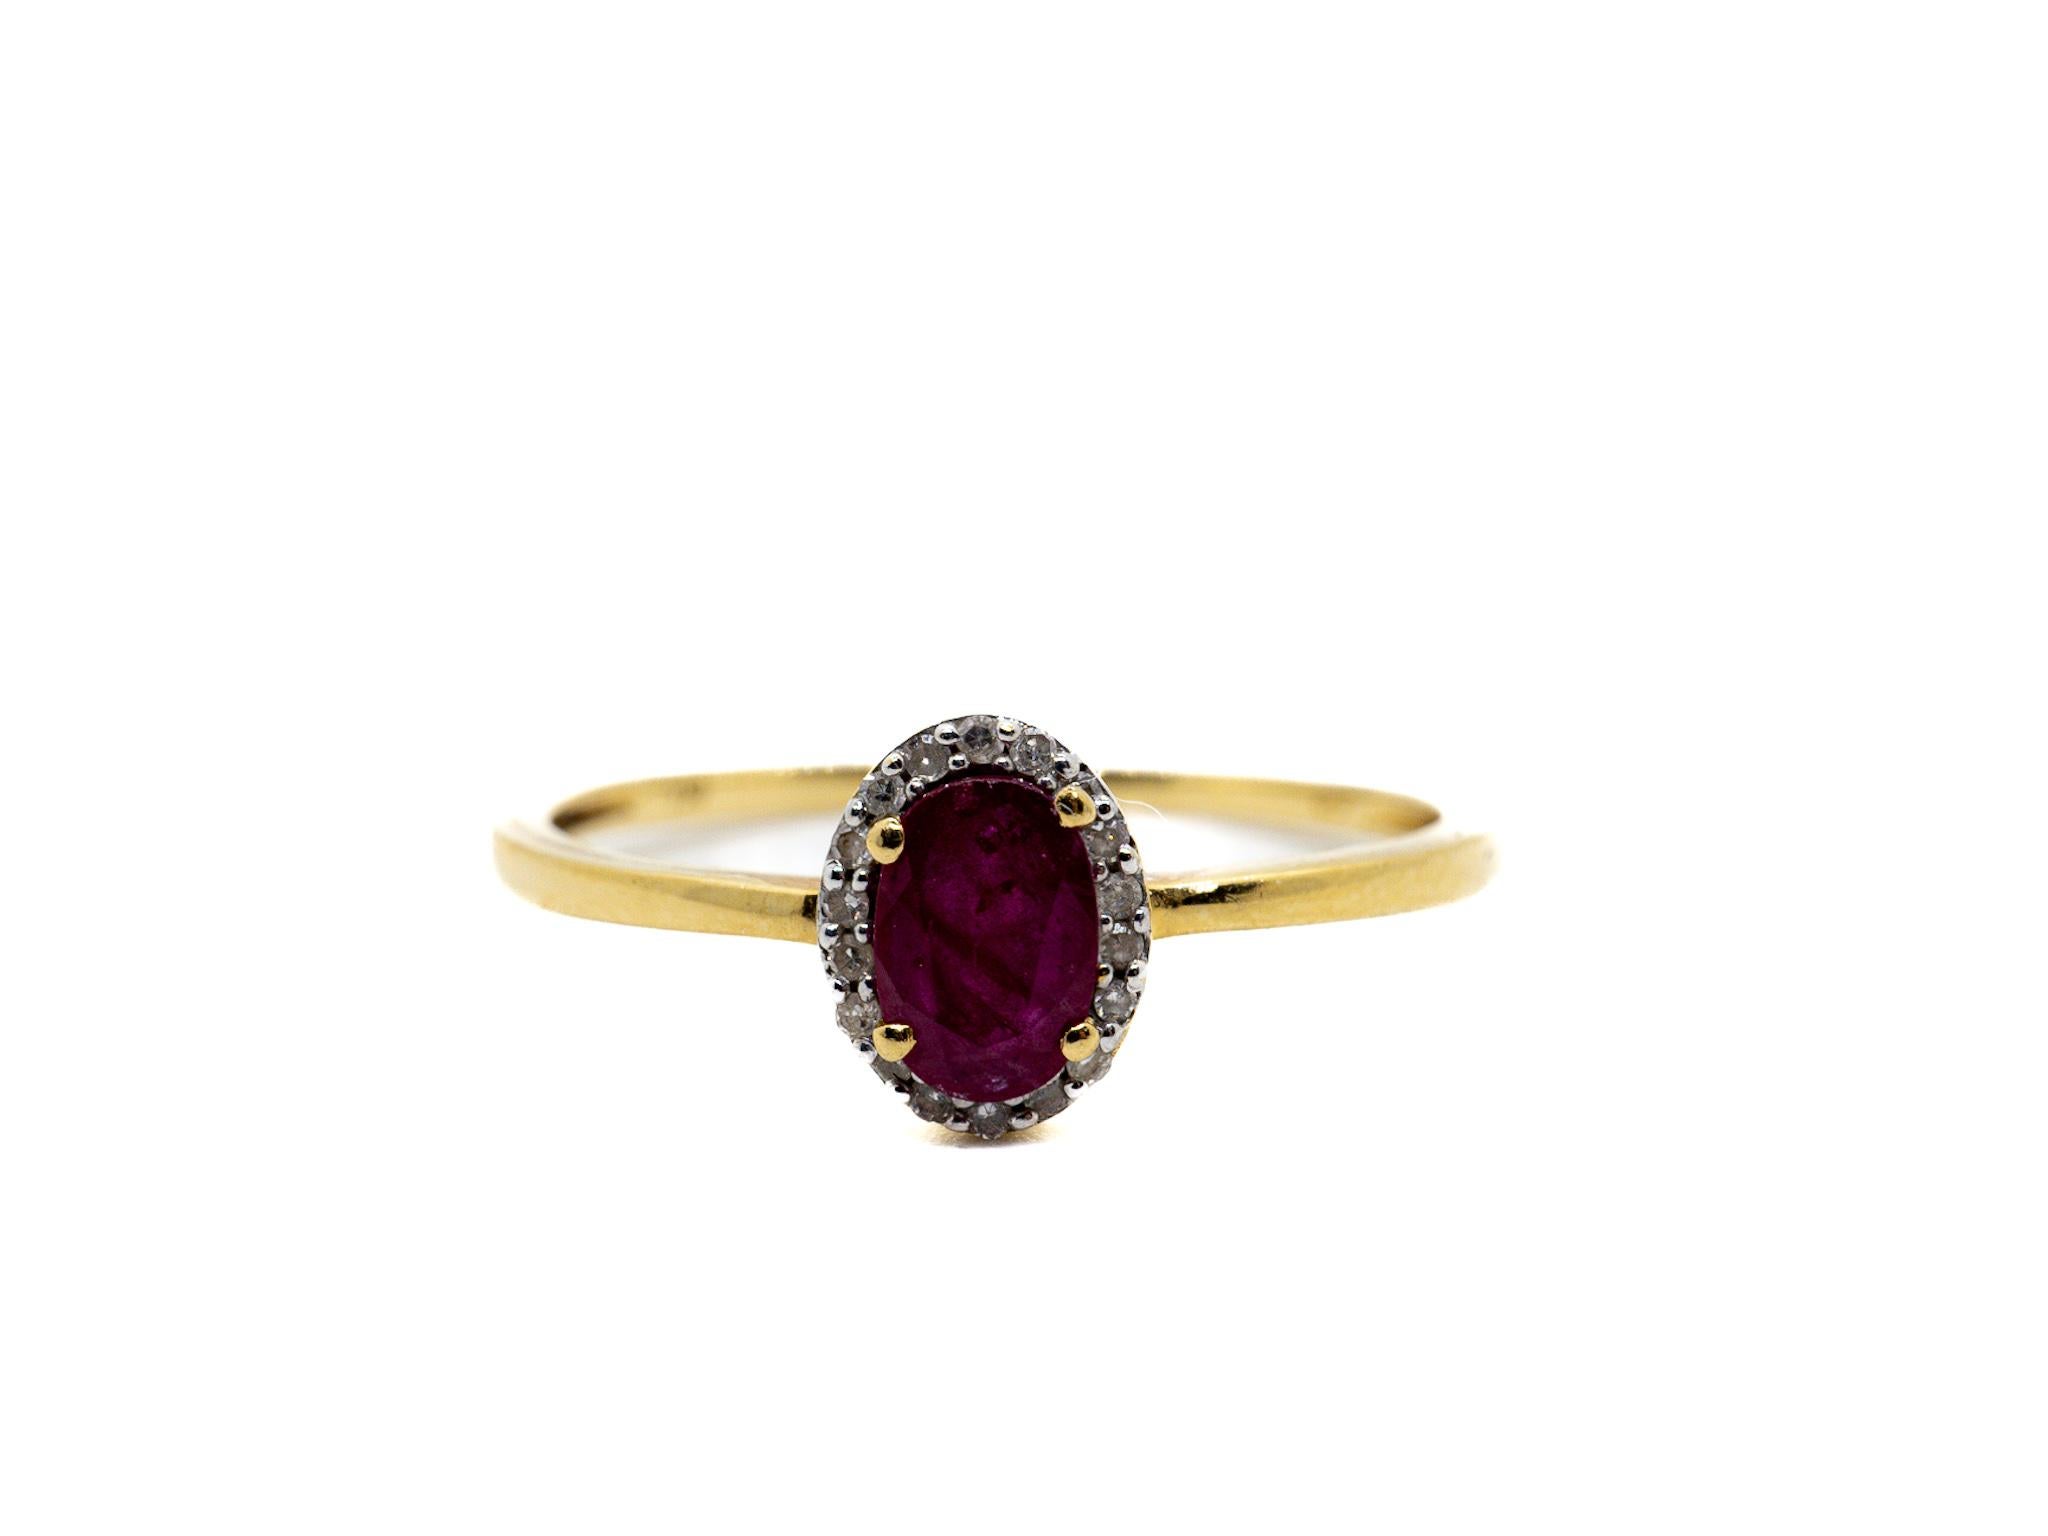 Introducing our exquisite Halo Ruby Ring, a true embodiment of elegance and sophistication. Handcrafted with precision and care, this stunning ring is made of luxurious 18K yellow gold, radiating a warm and timeless glow.

At the center of the ring,